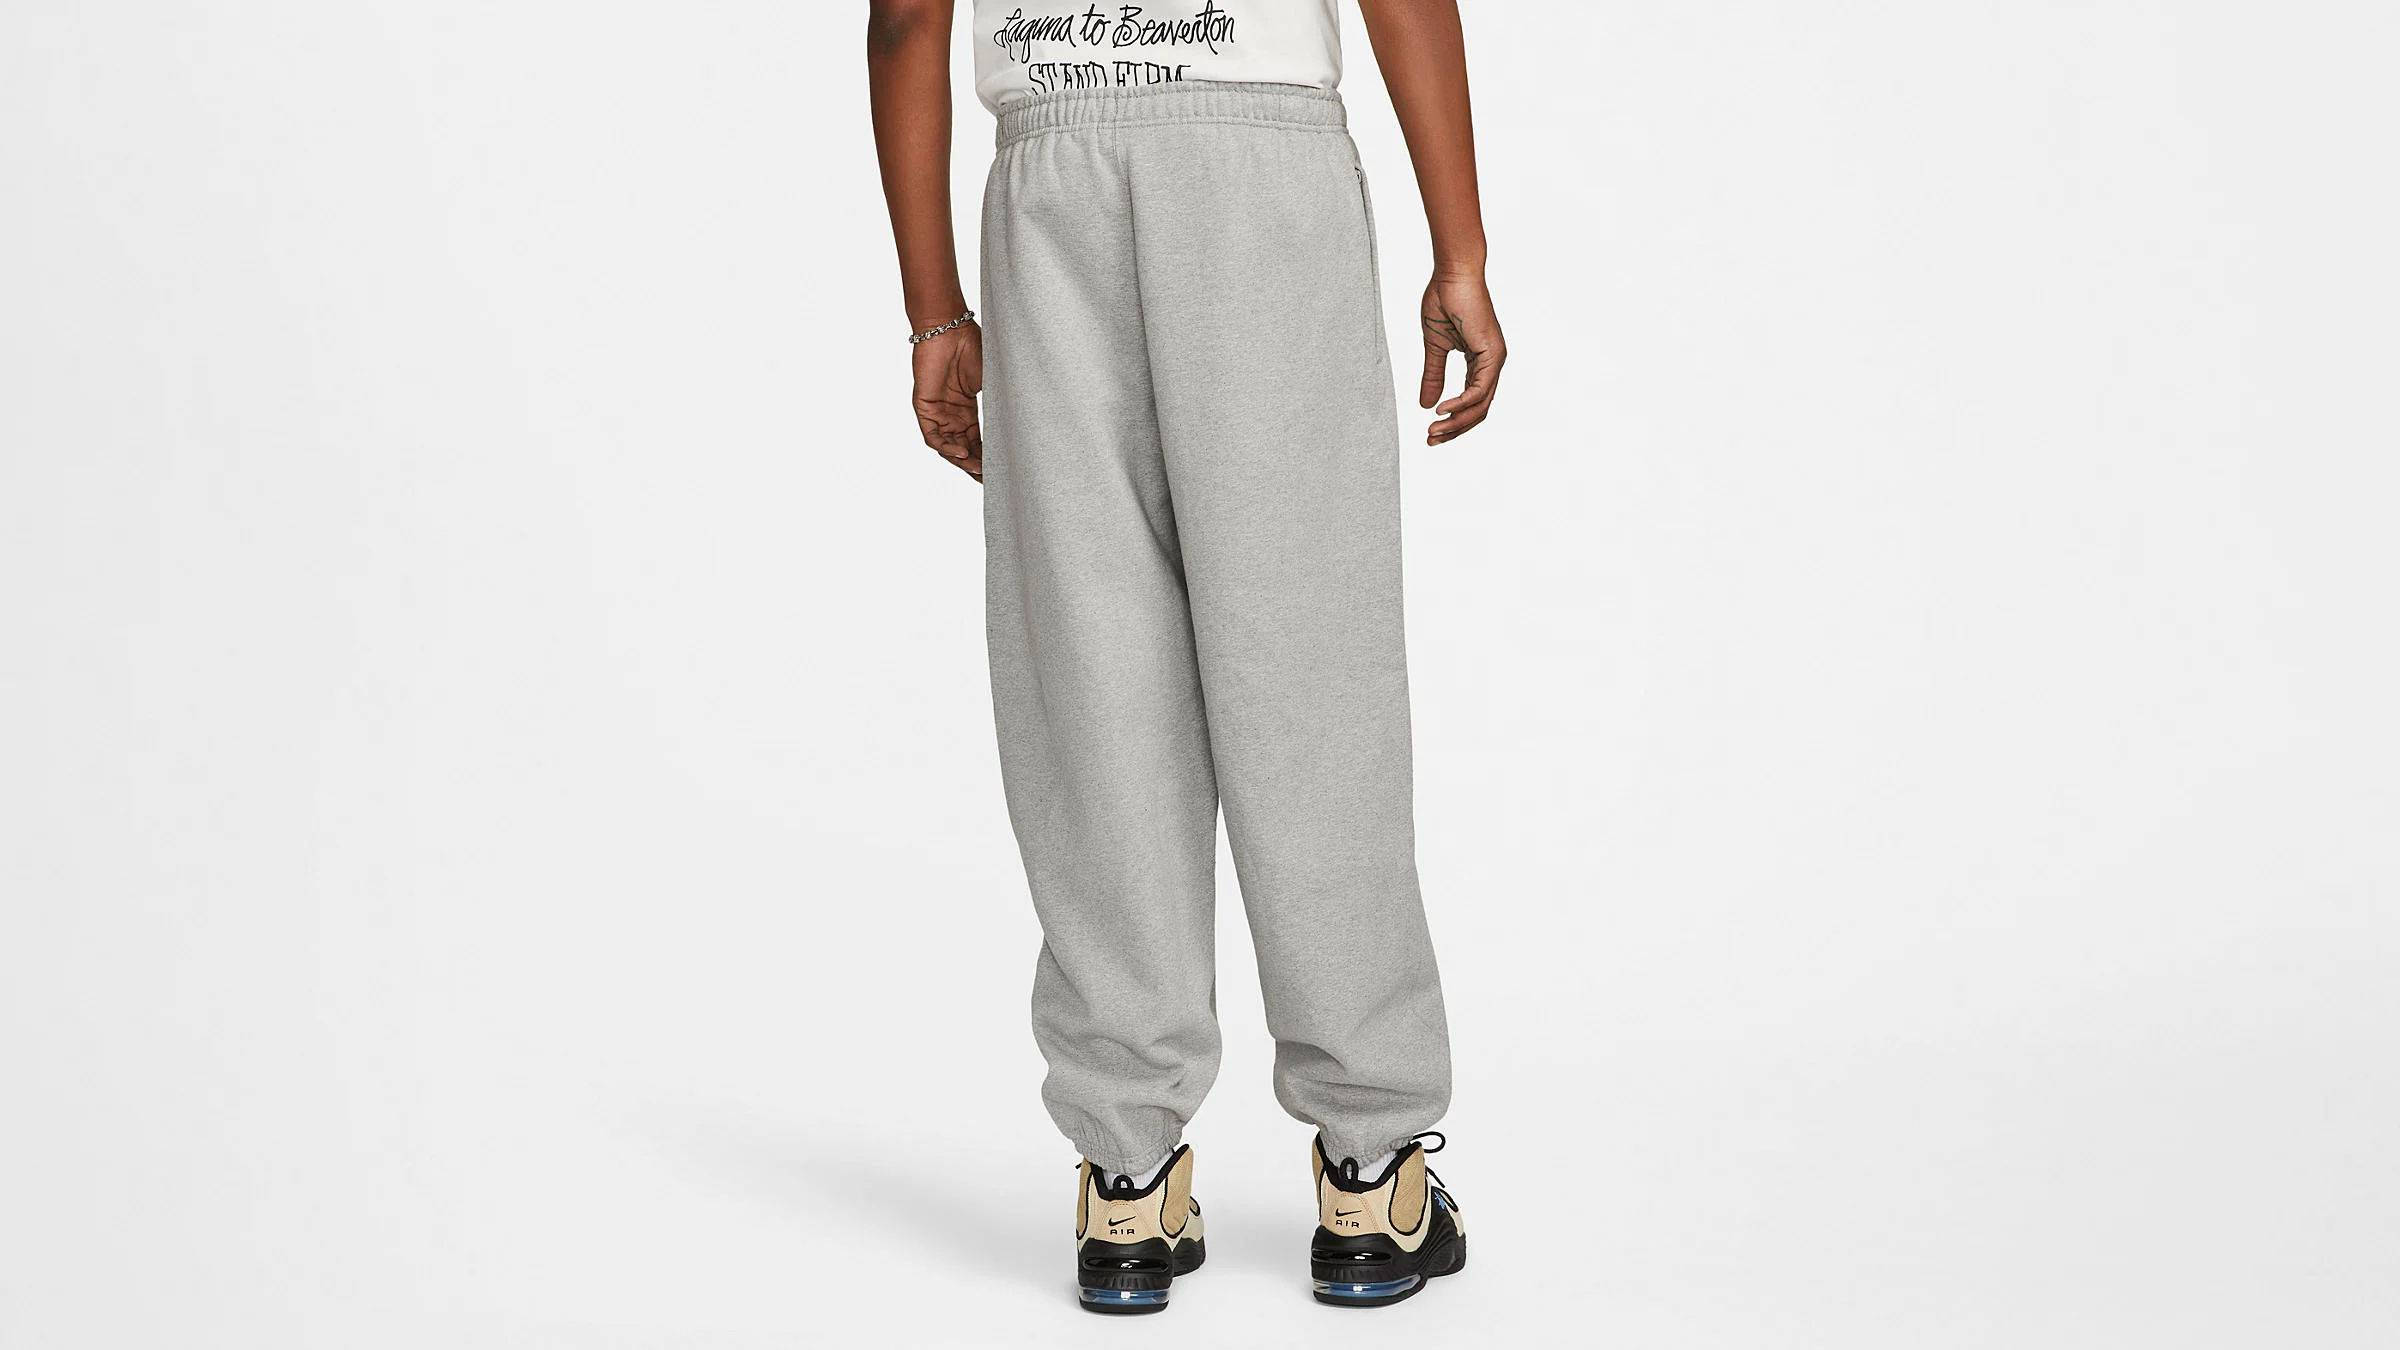 Nike x Stussy Sweat Pant | Where To Buy | do9340-063 | The Sole